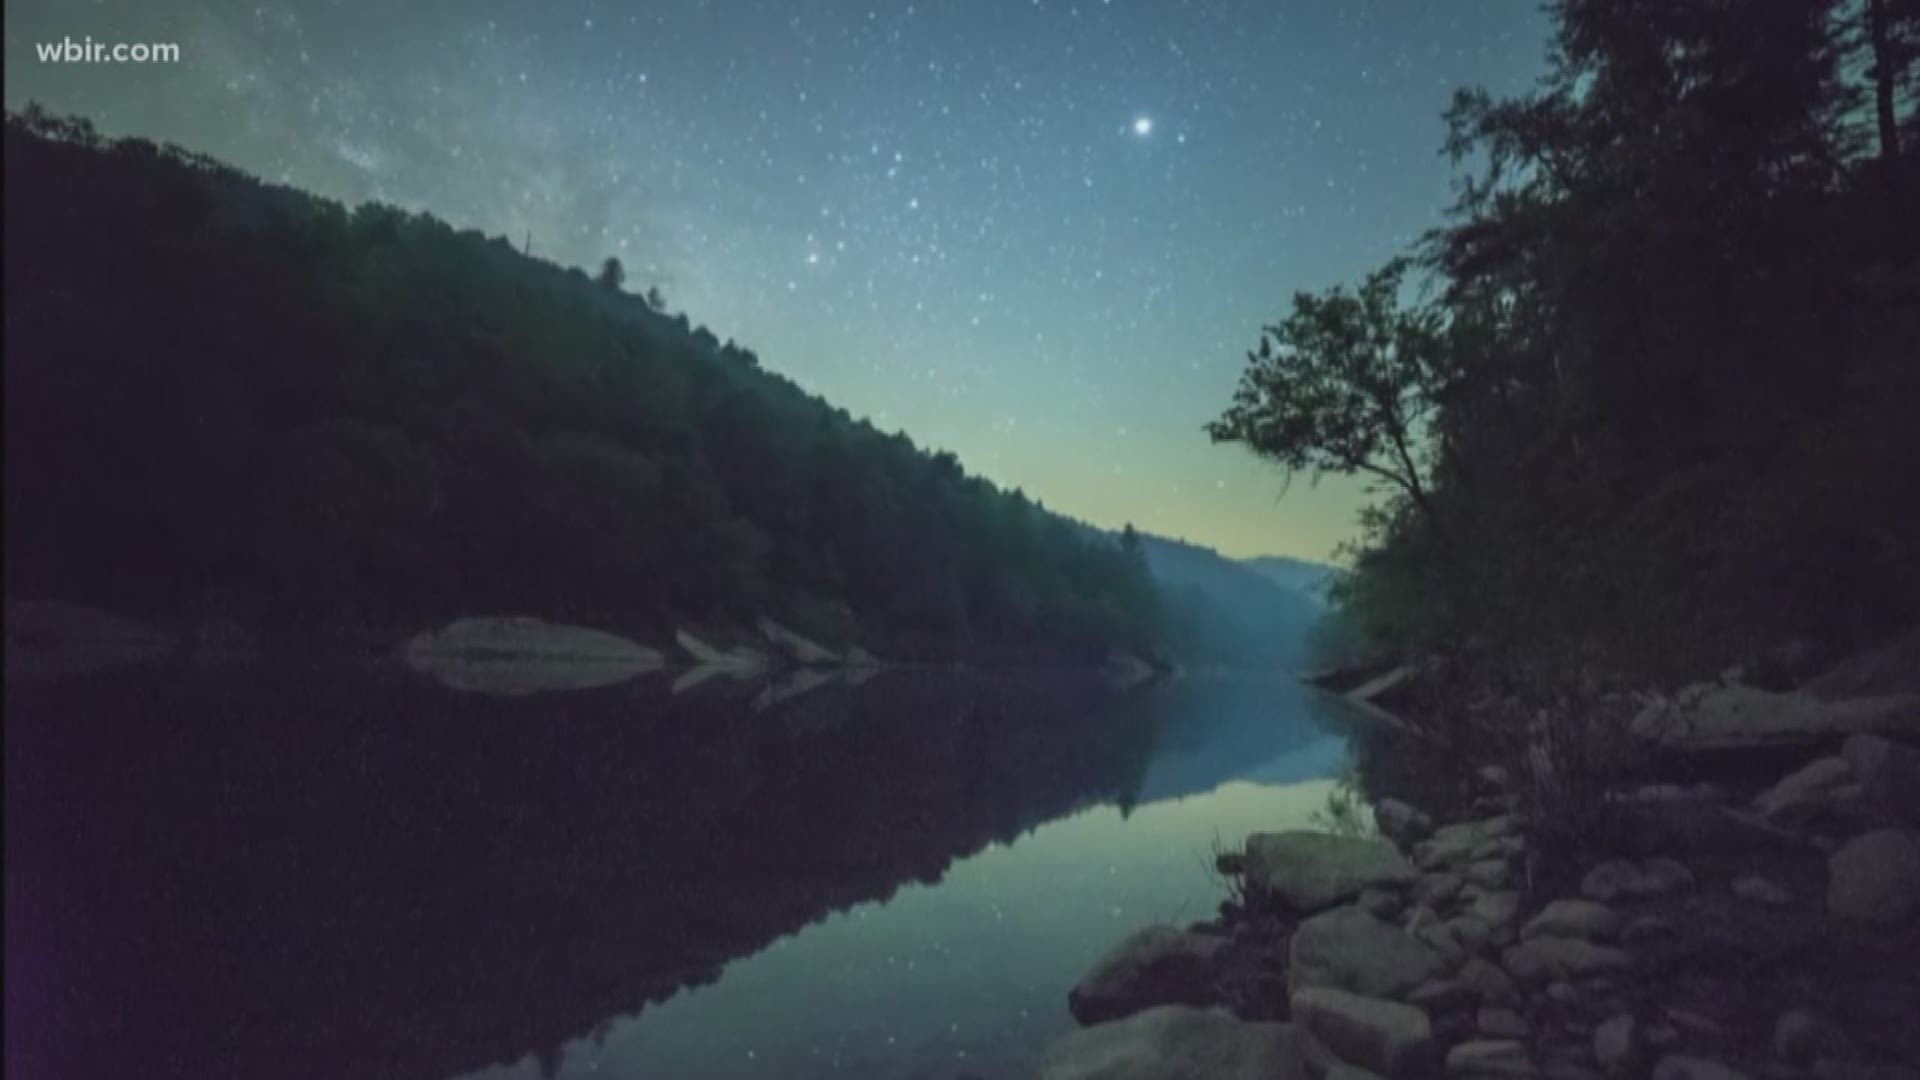 One of the newest of national park sites here in East Tennessee is working to preserve and protect the night sky.